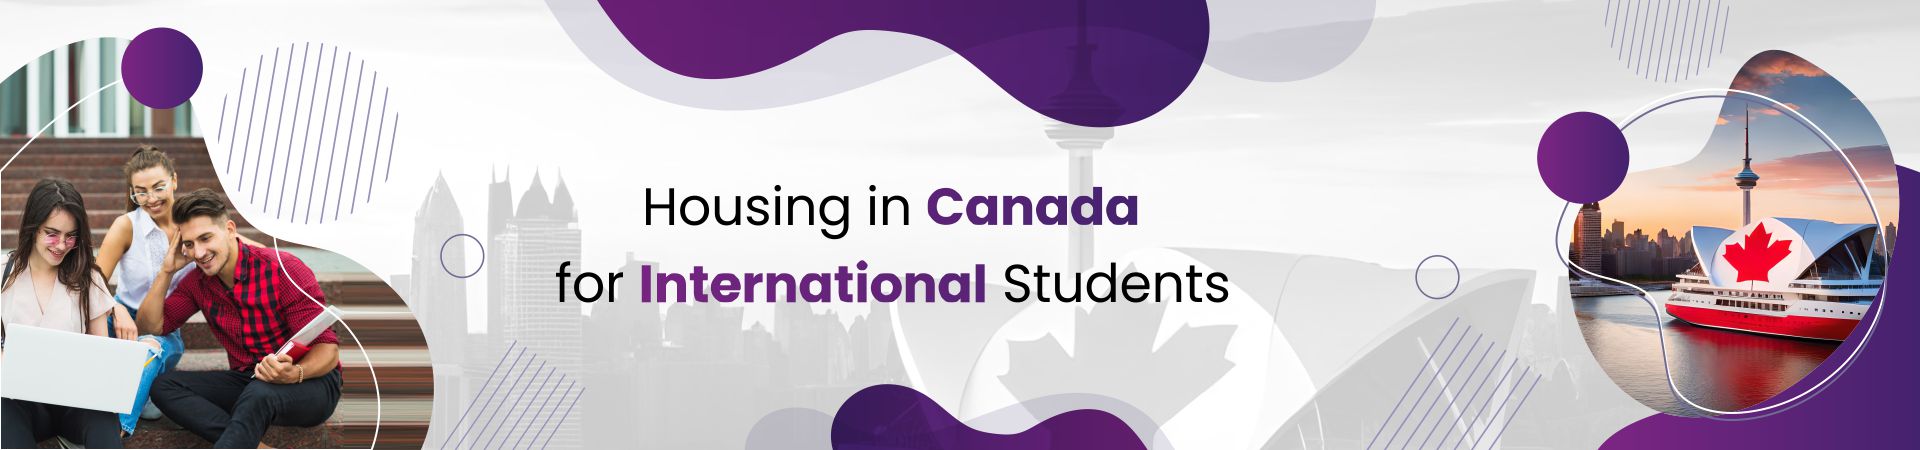 Housing in Canada for International Students